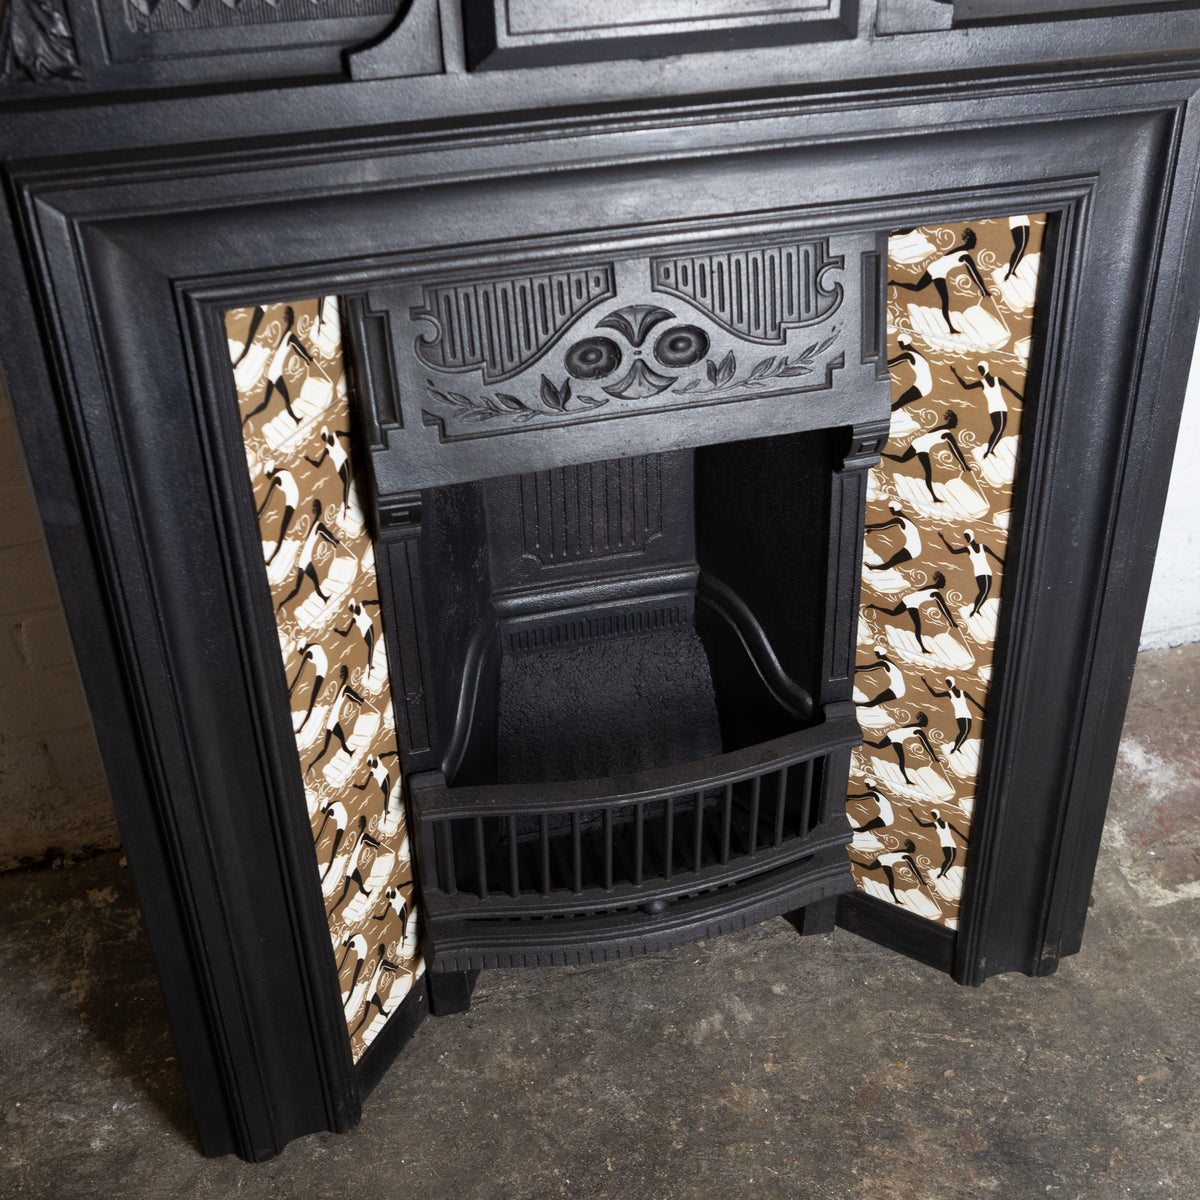 Antique Cast Iron Combination Fireplace with Swimming Lady Tiles | The Architectural Forum